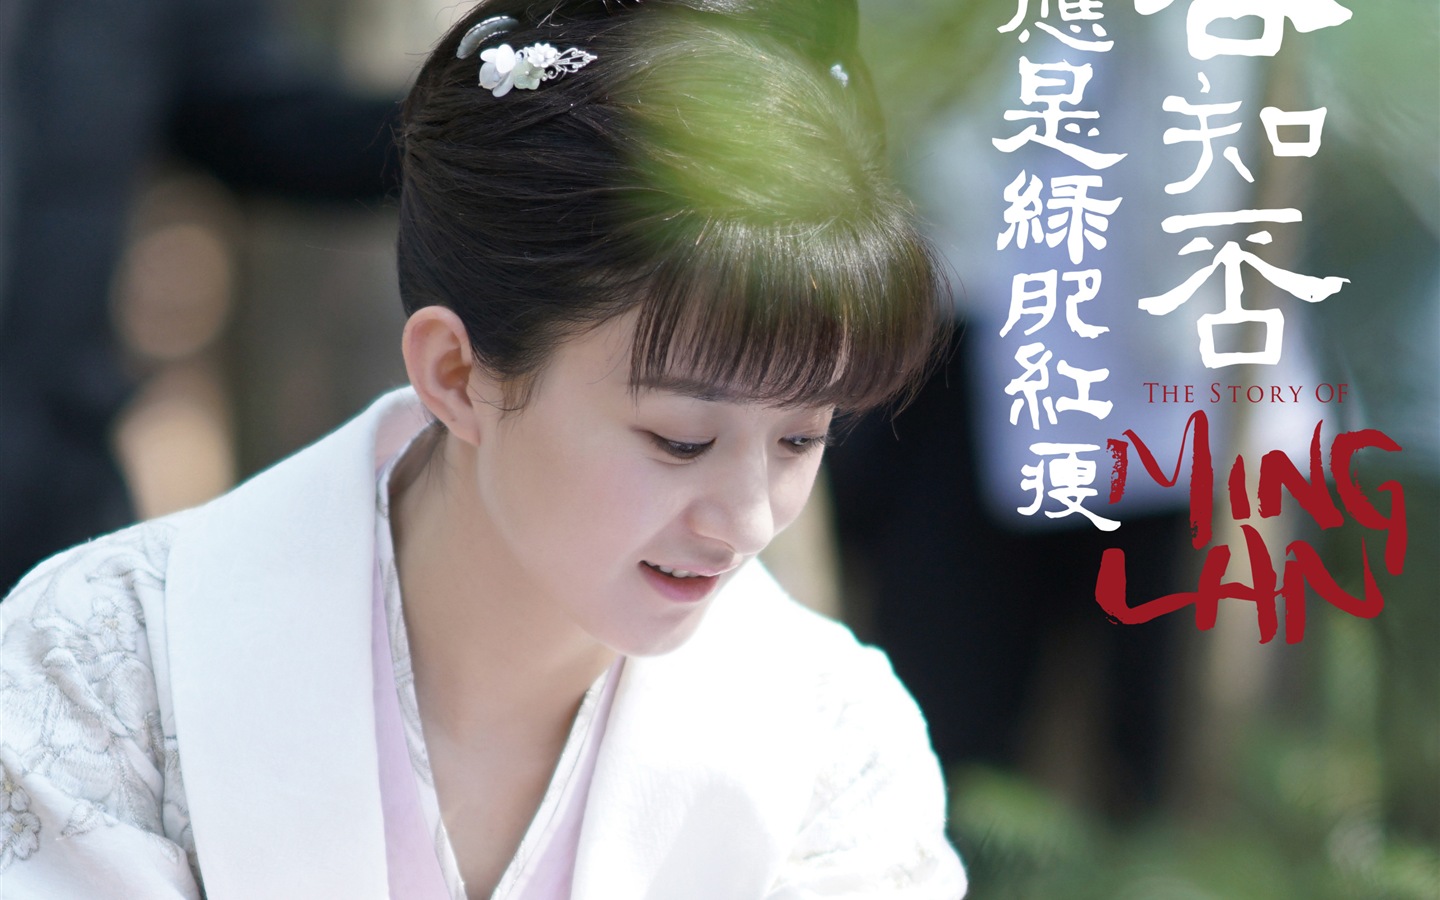 The Story Of MingLan, TV series HD wallpapers #27 - 1440x900